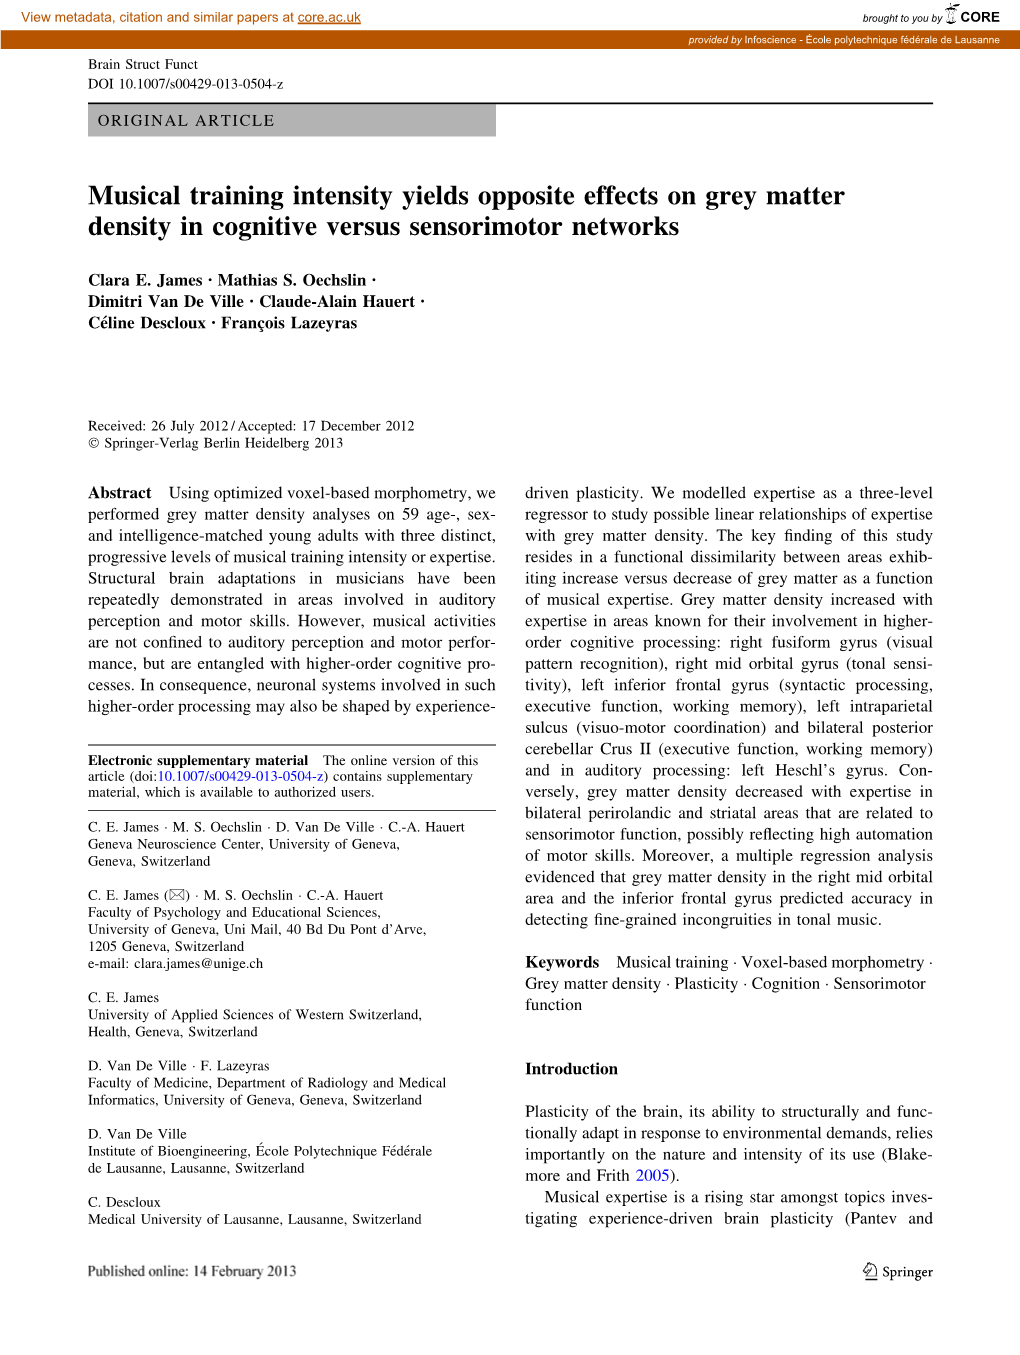 Musical Training Intensity Yields Opposite Effects on Grey Matter Density in Cognitive Versus Sensorimotor Networks